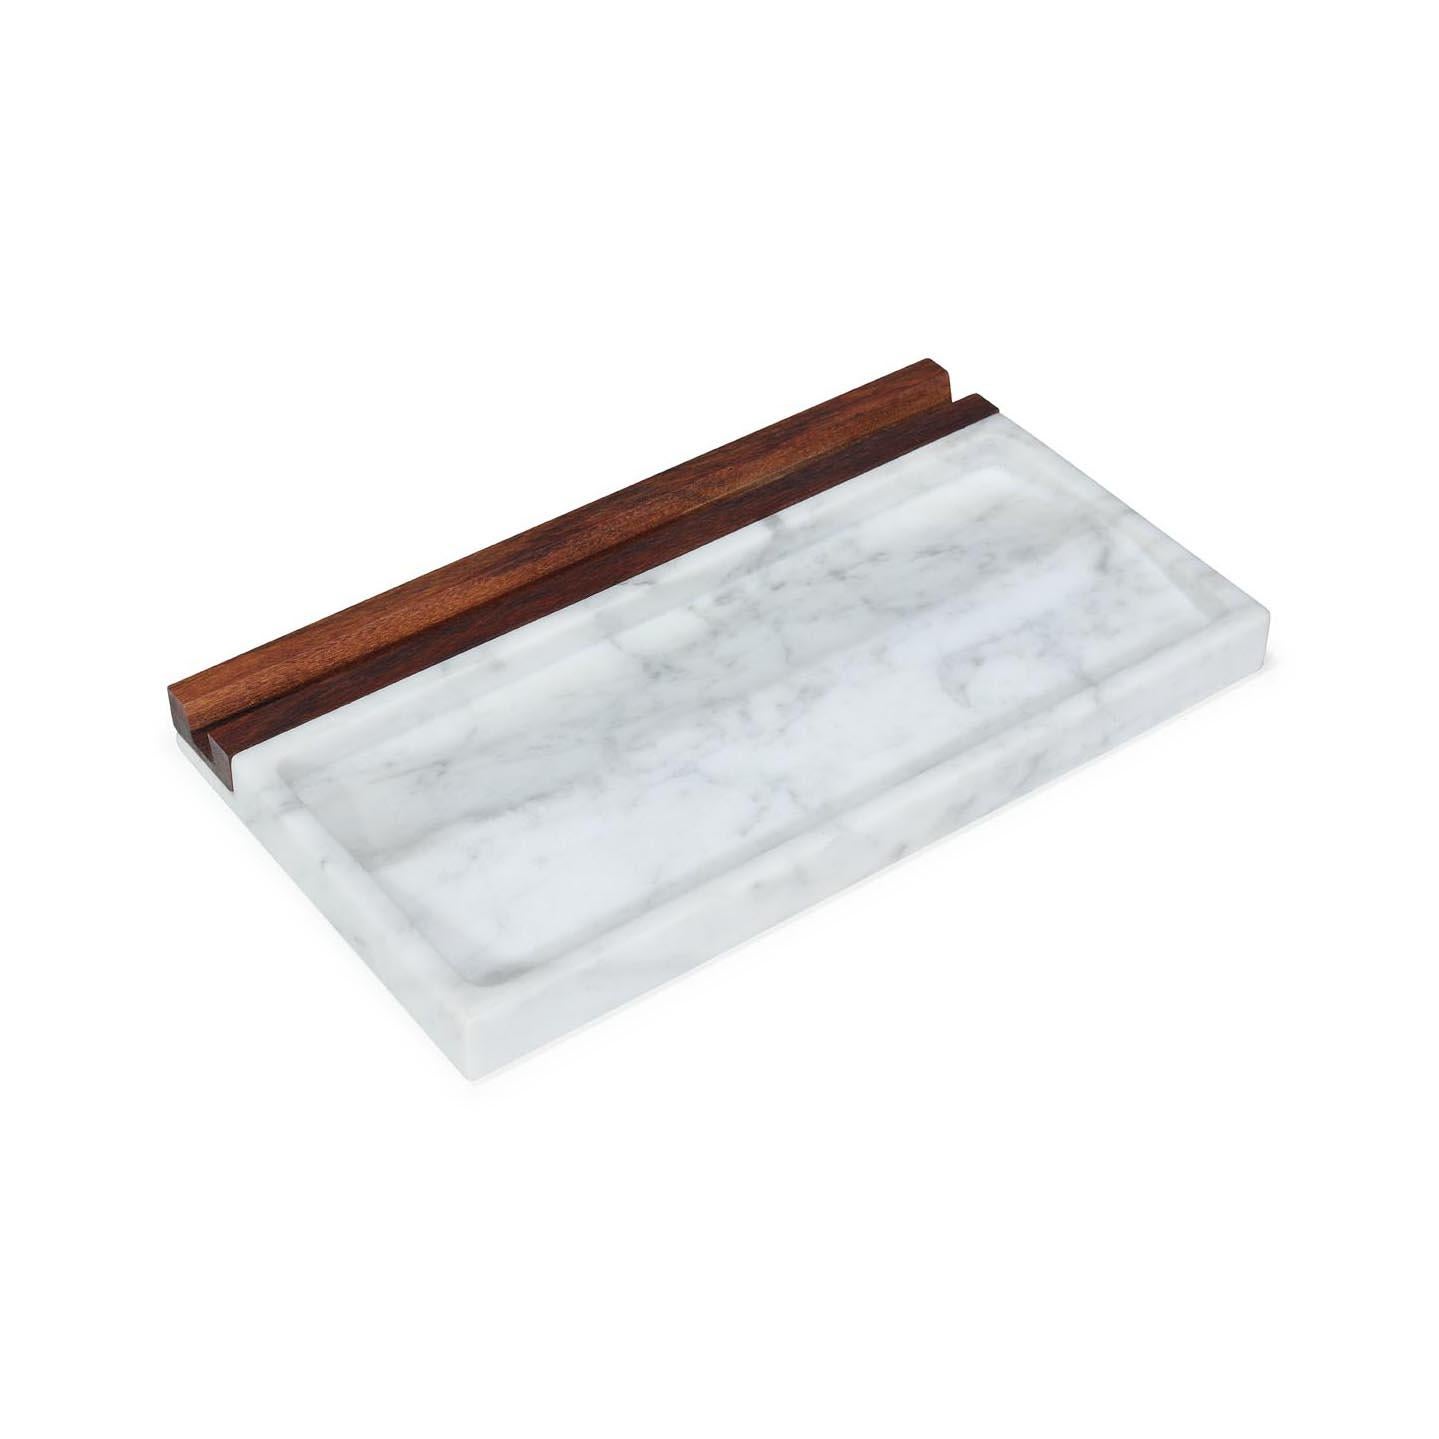 Tech tray It's not just one more office accessory.
It's THE multifunctional and stanning tray where you can put your phone, tablet, pens, clips...
Made from marble and wood leftovers in order to have a low environmental impact and promote a